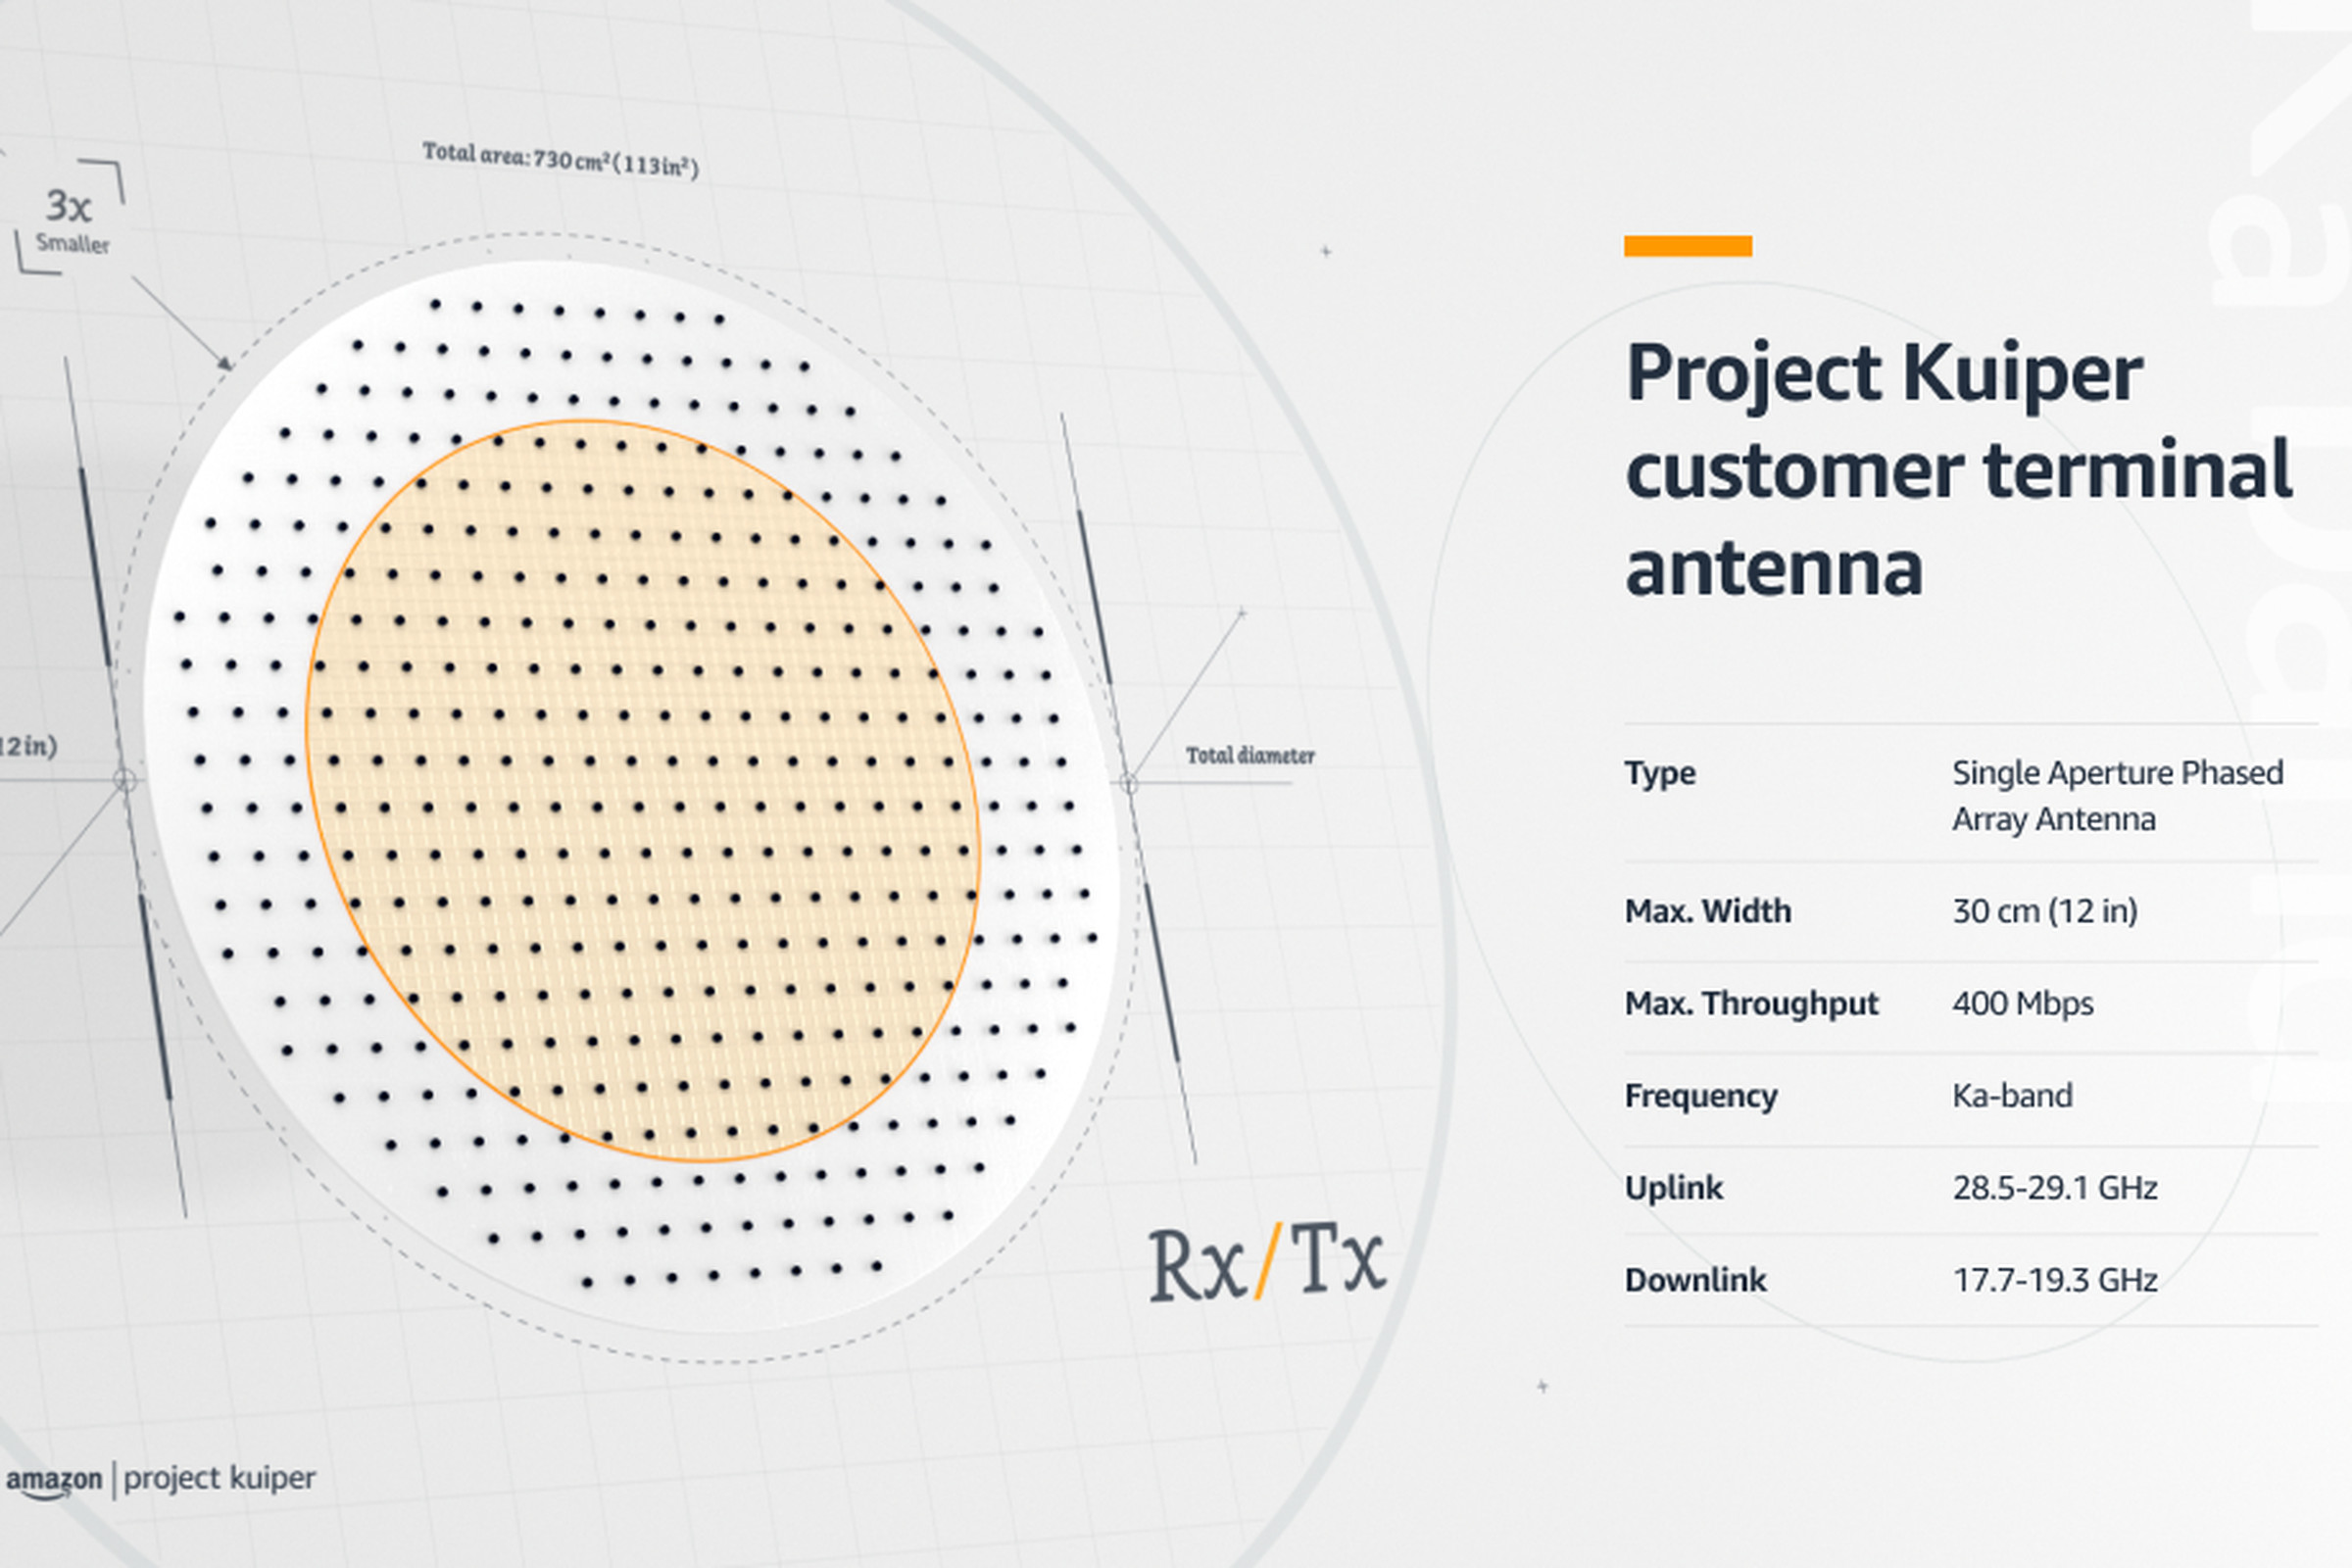 A graphic showing the design of Amazon’s user antenna